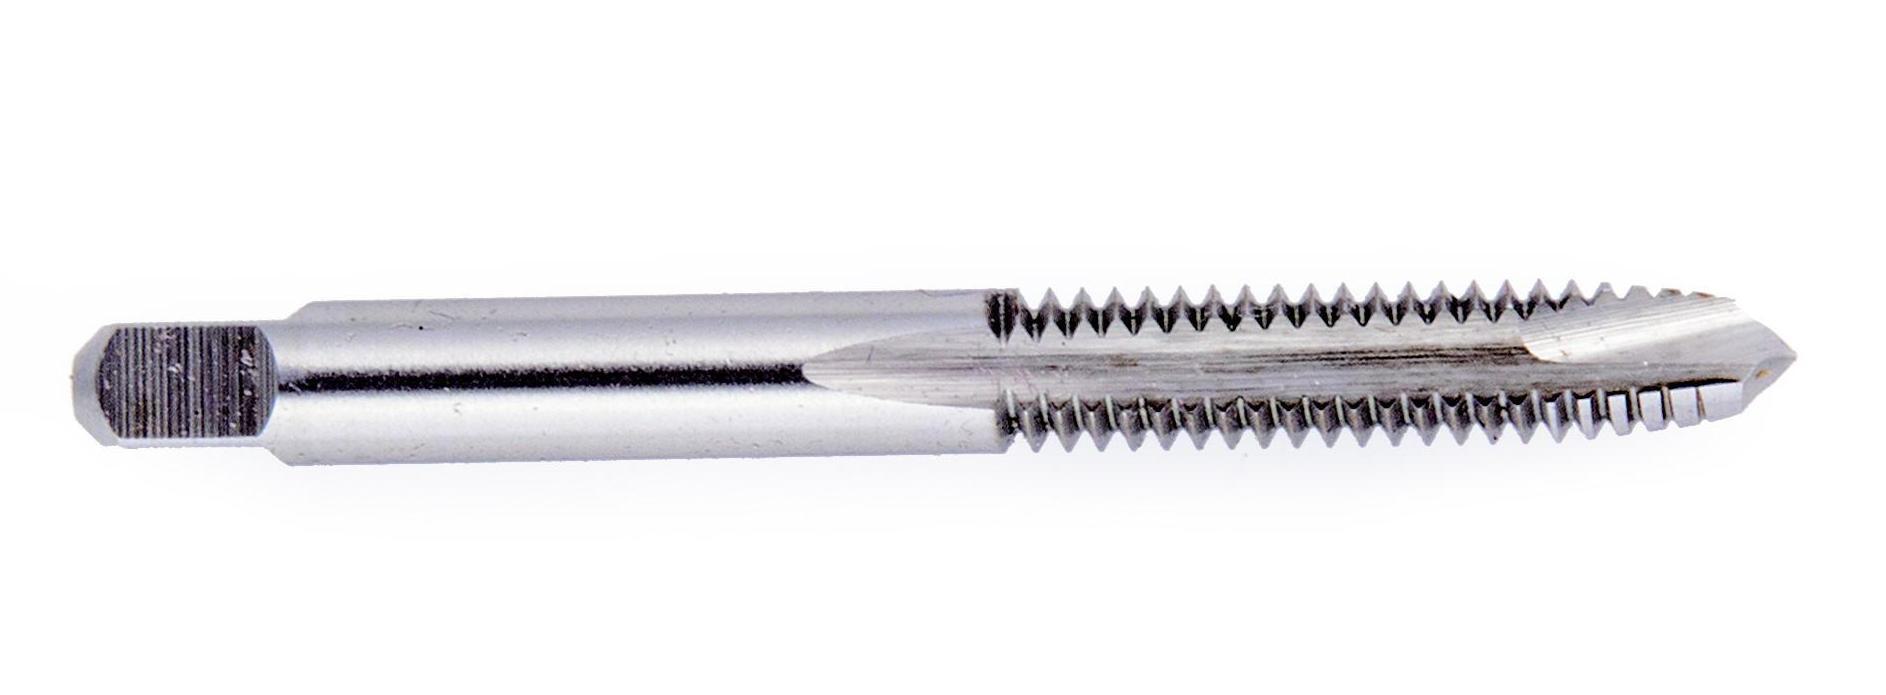 Spiral Point Tap, M8 x 1 Size, D5 Limit, 2 Flutes, Plug, Metric With Steam Oxide